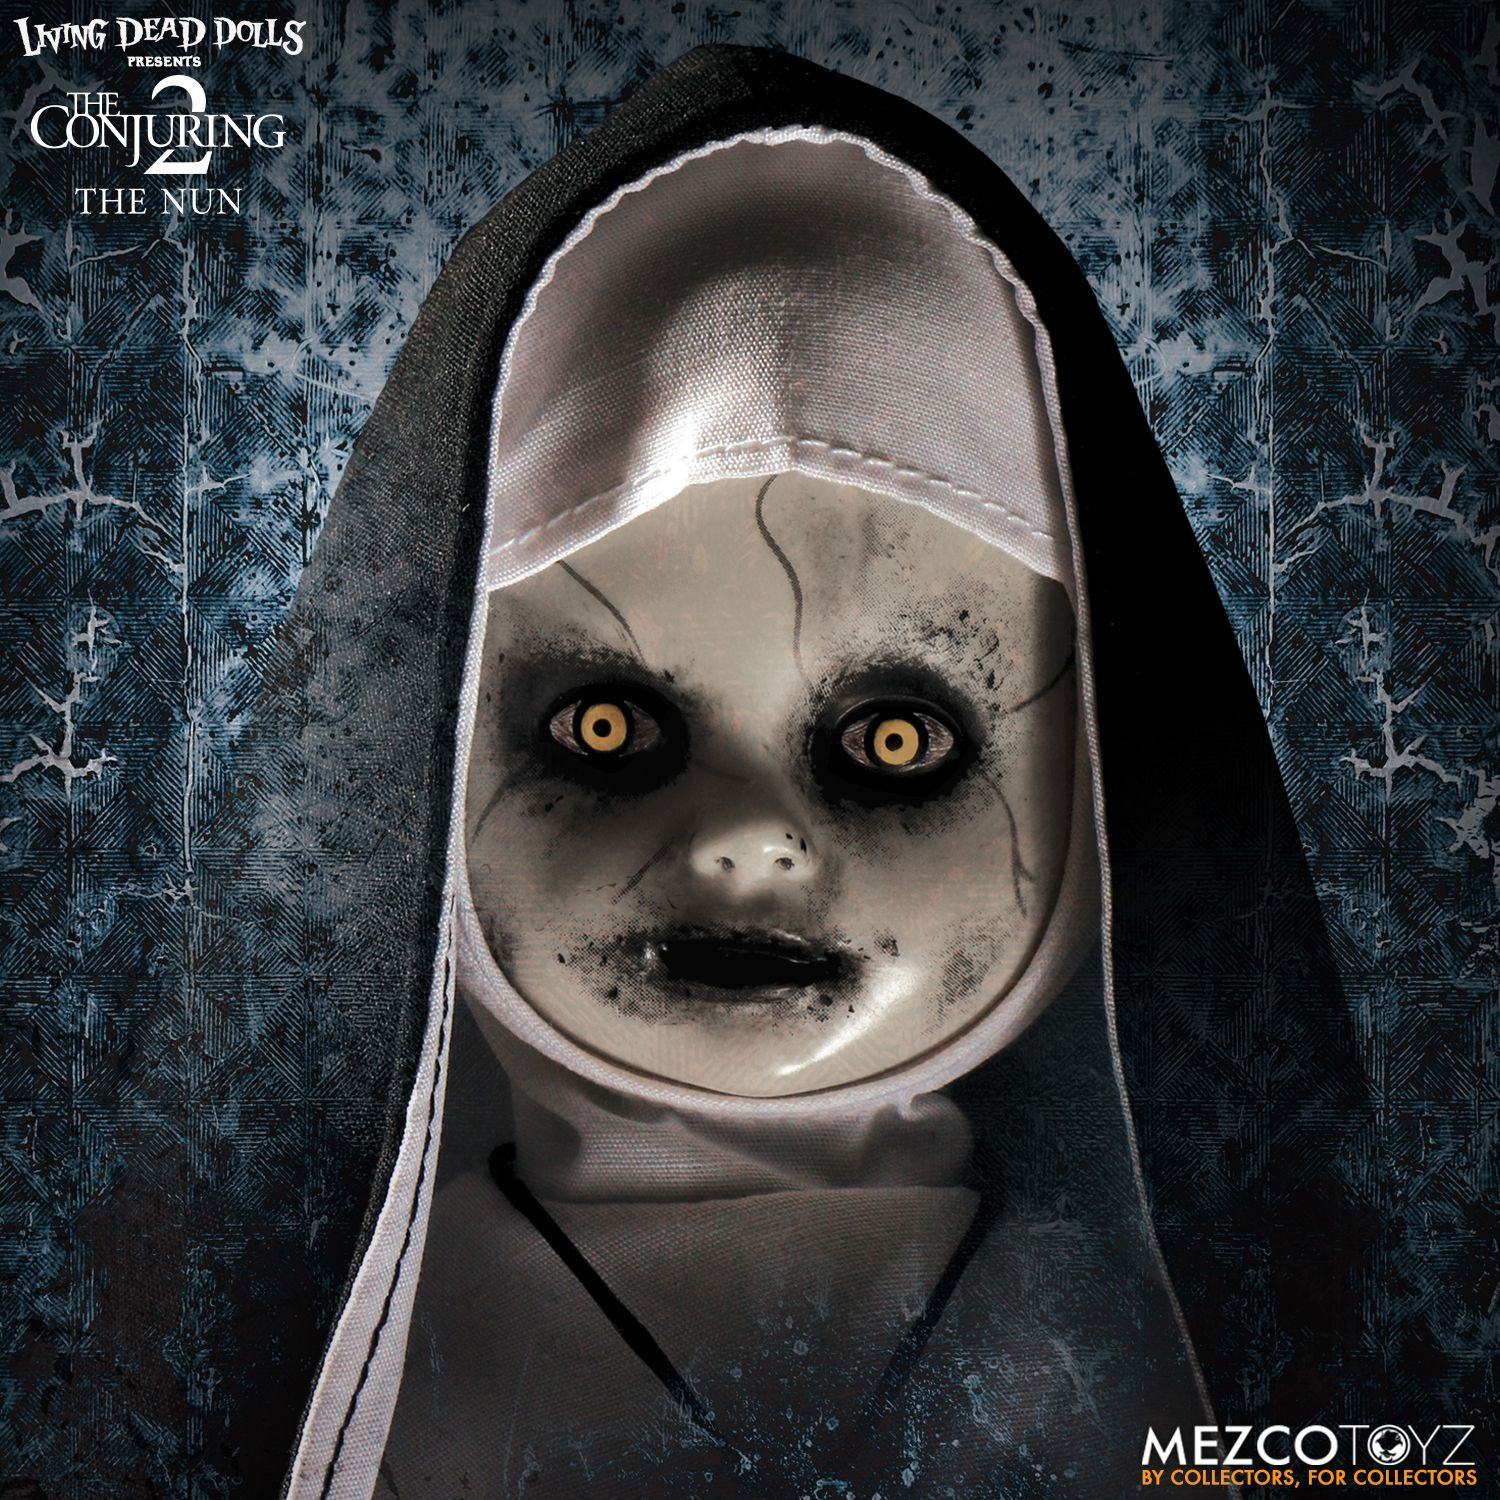 The Conjuring 2 Living Dead Dolls Doll The Nun 25 cm